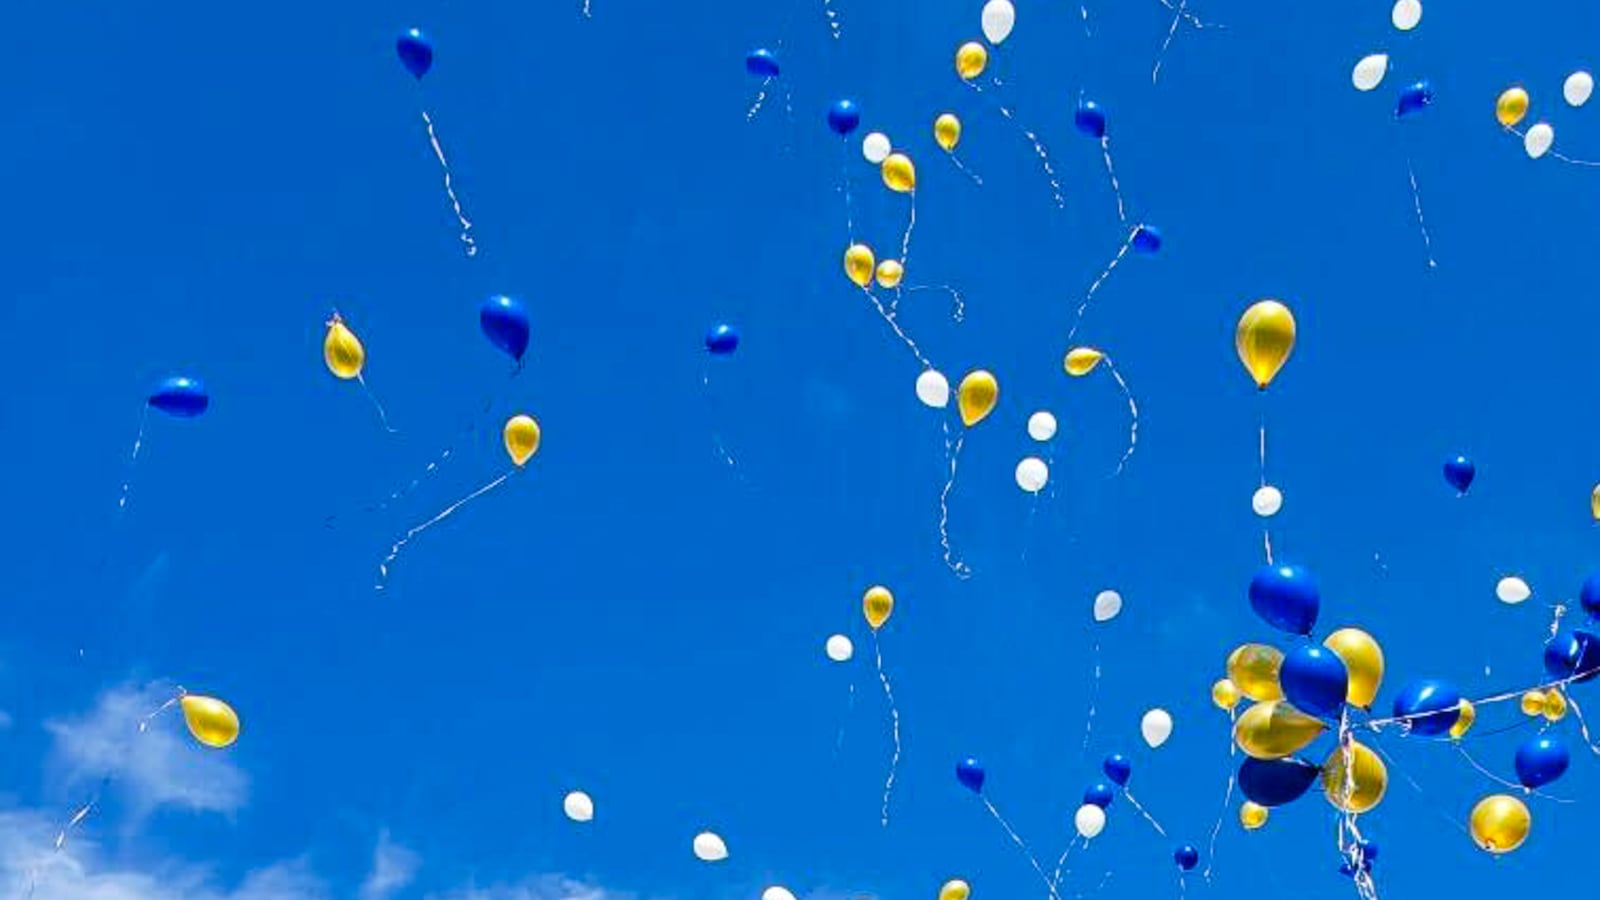 Hundreds of blue, gold, and white balloons are released above Simeon Career Academy.